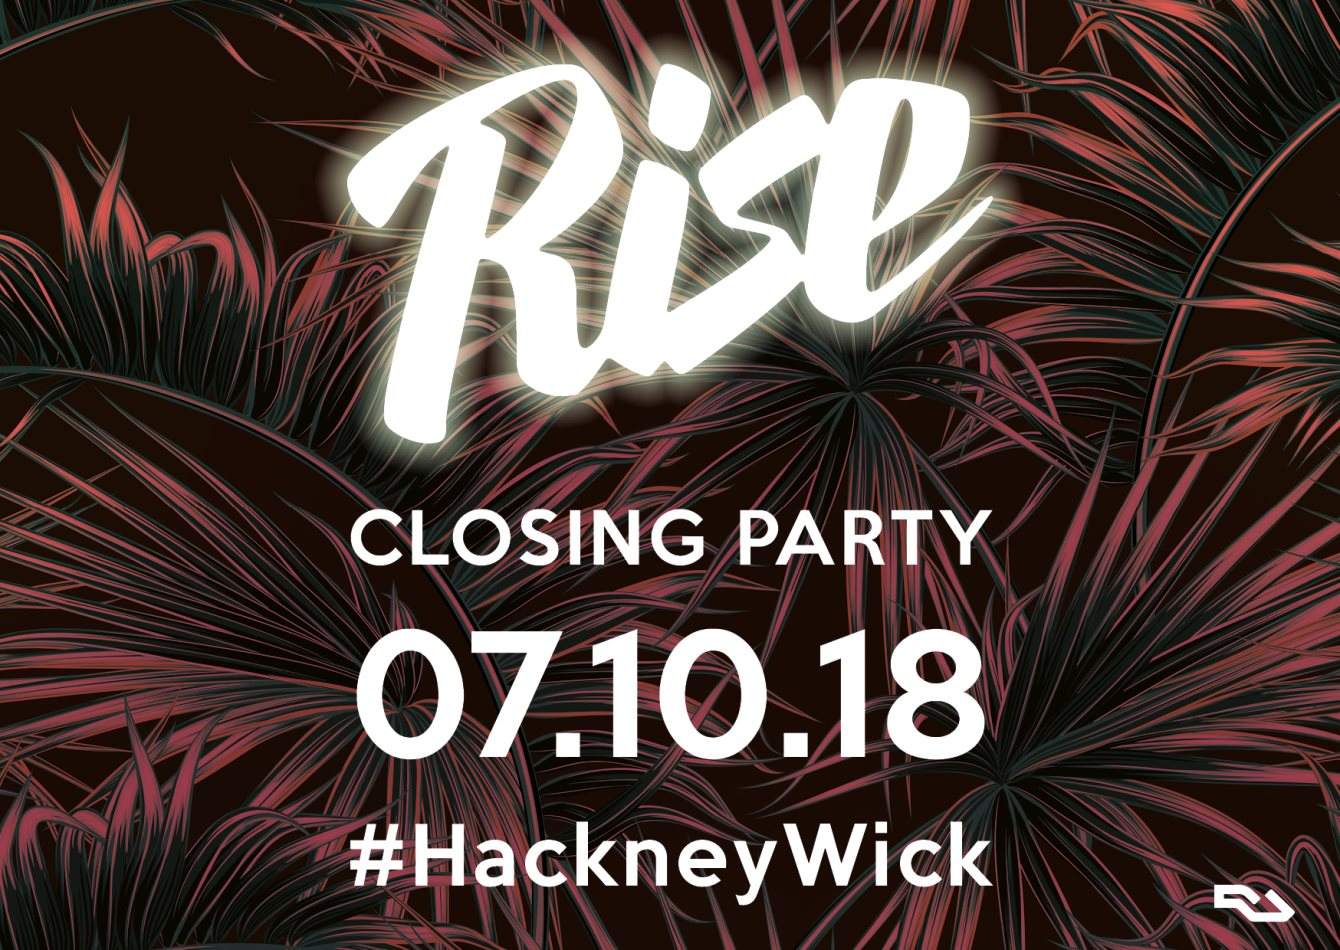 Rise: Closing Party w Chicks Luv Us - フライヤー表